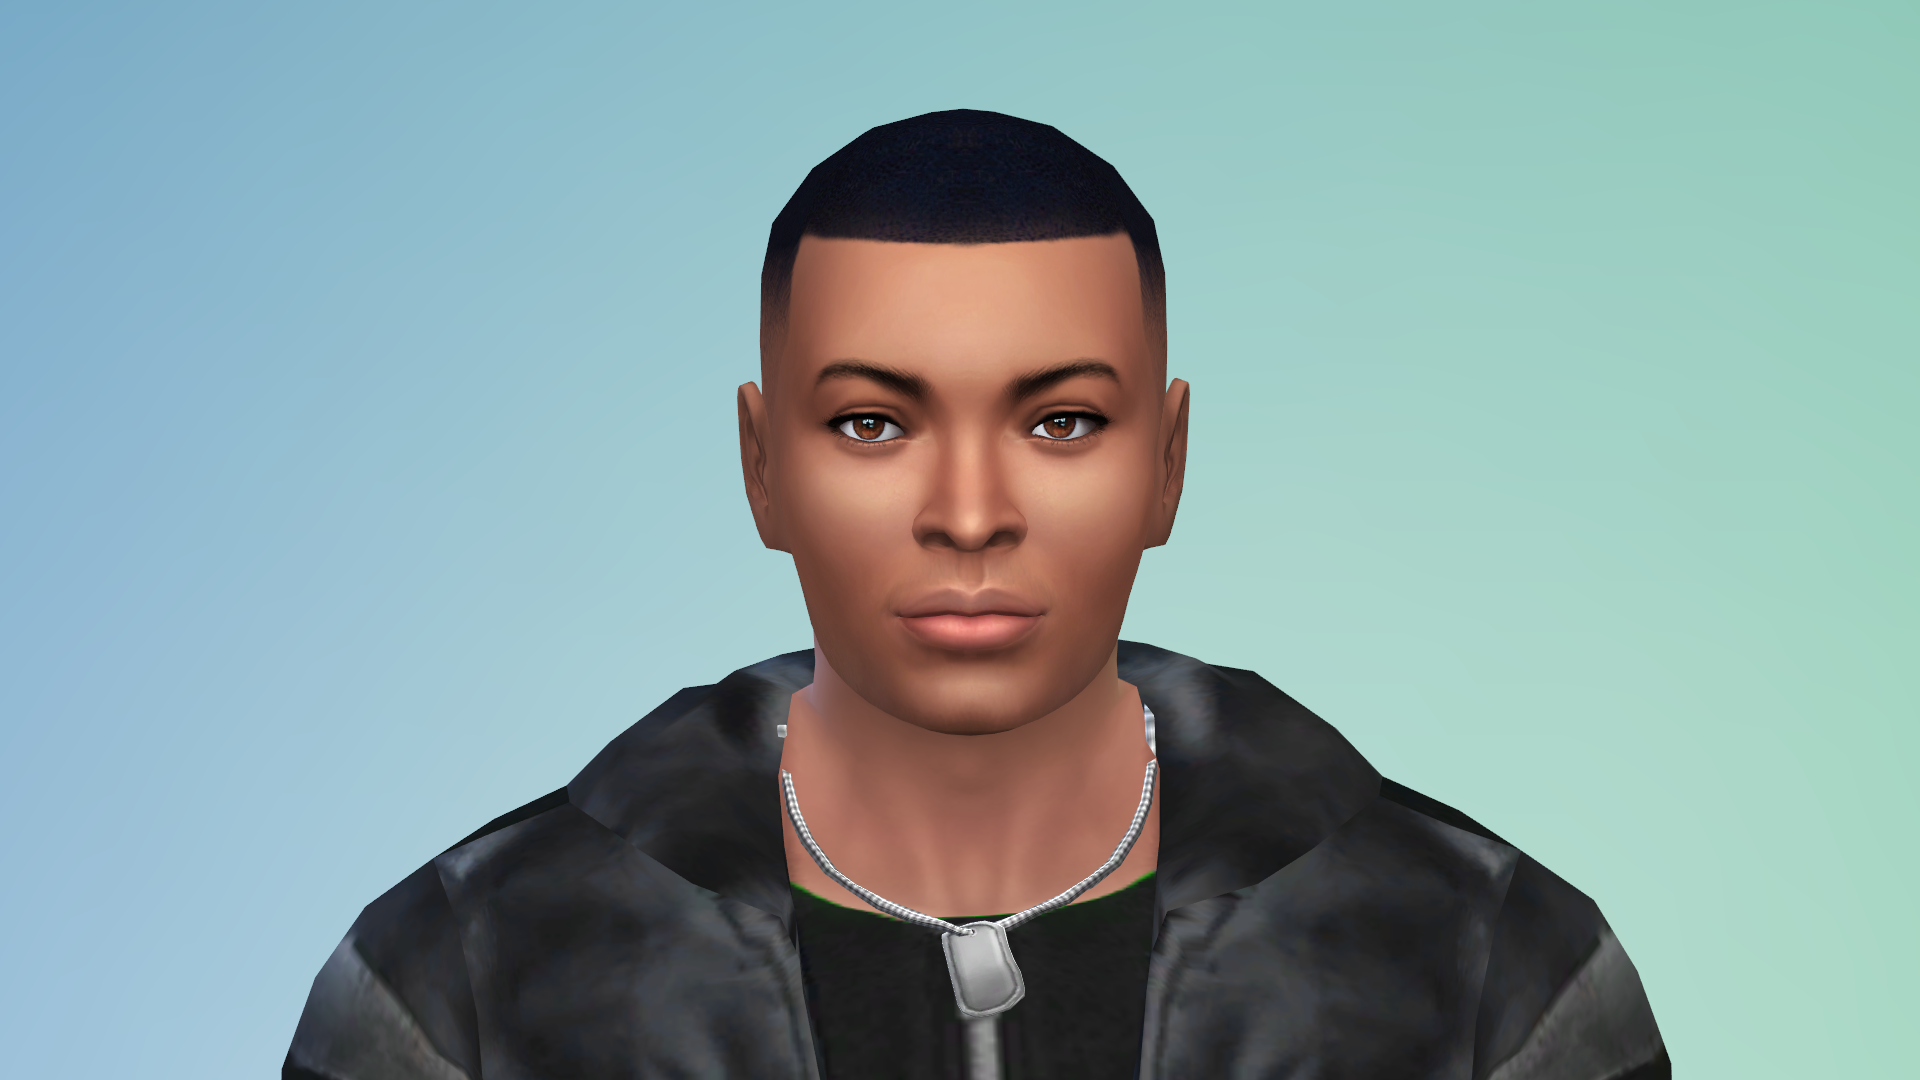 Sims 4 Dr. Dre Free Download - The Sims 4 Catalog